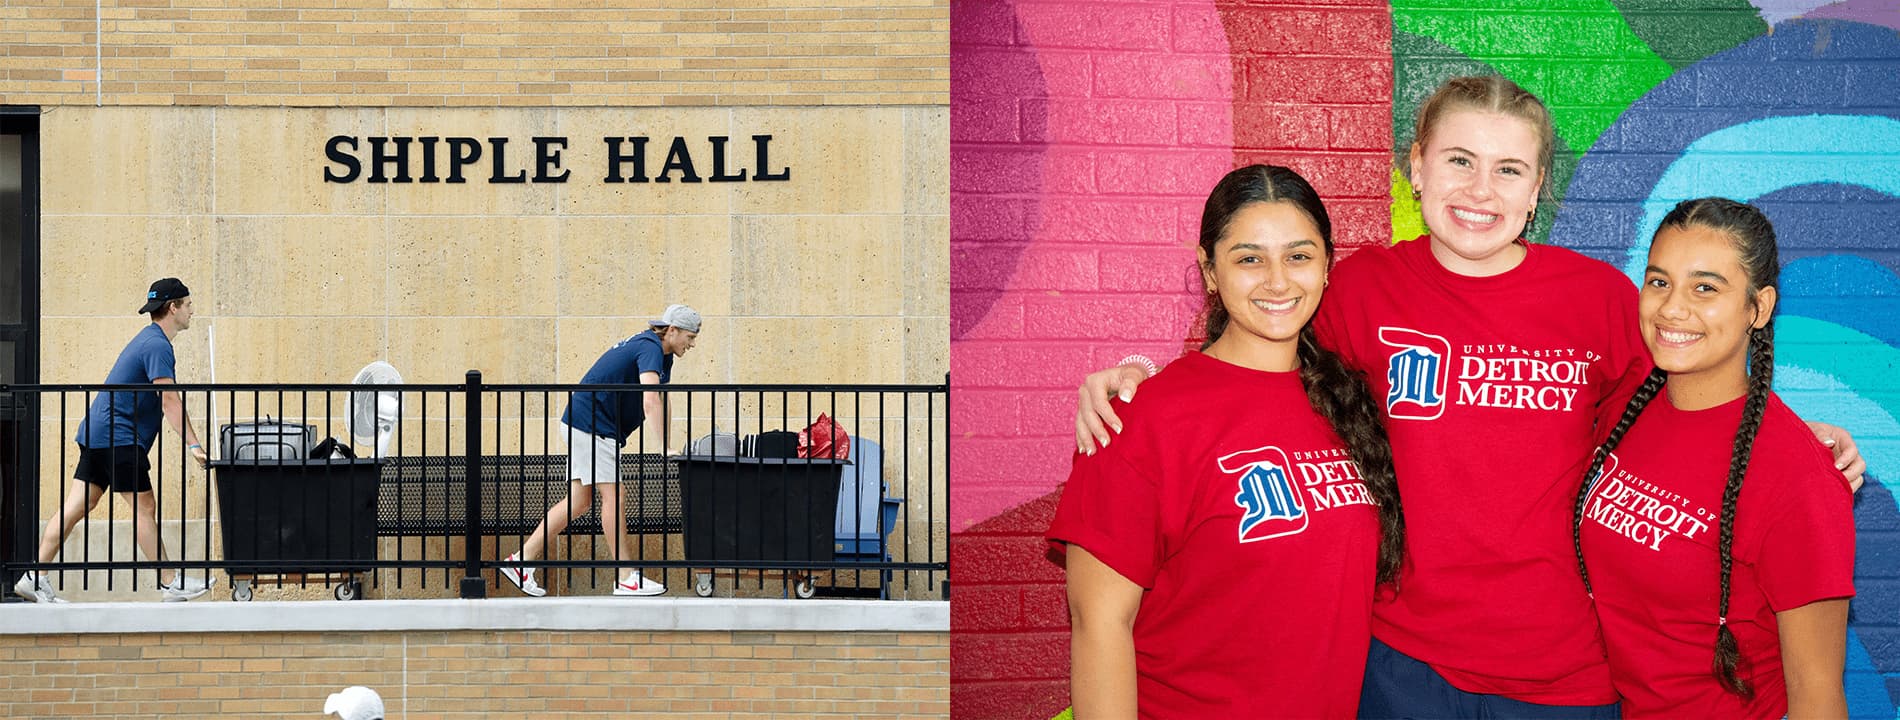 Two photos of students outdoors, on the left two students push carts past the Shiple Hall sign and on the right, three students wearing red University of ɫۺϾþ Mercy t-shirts pose and smile in front of a colorful brick wall.